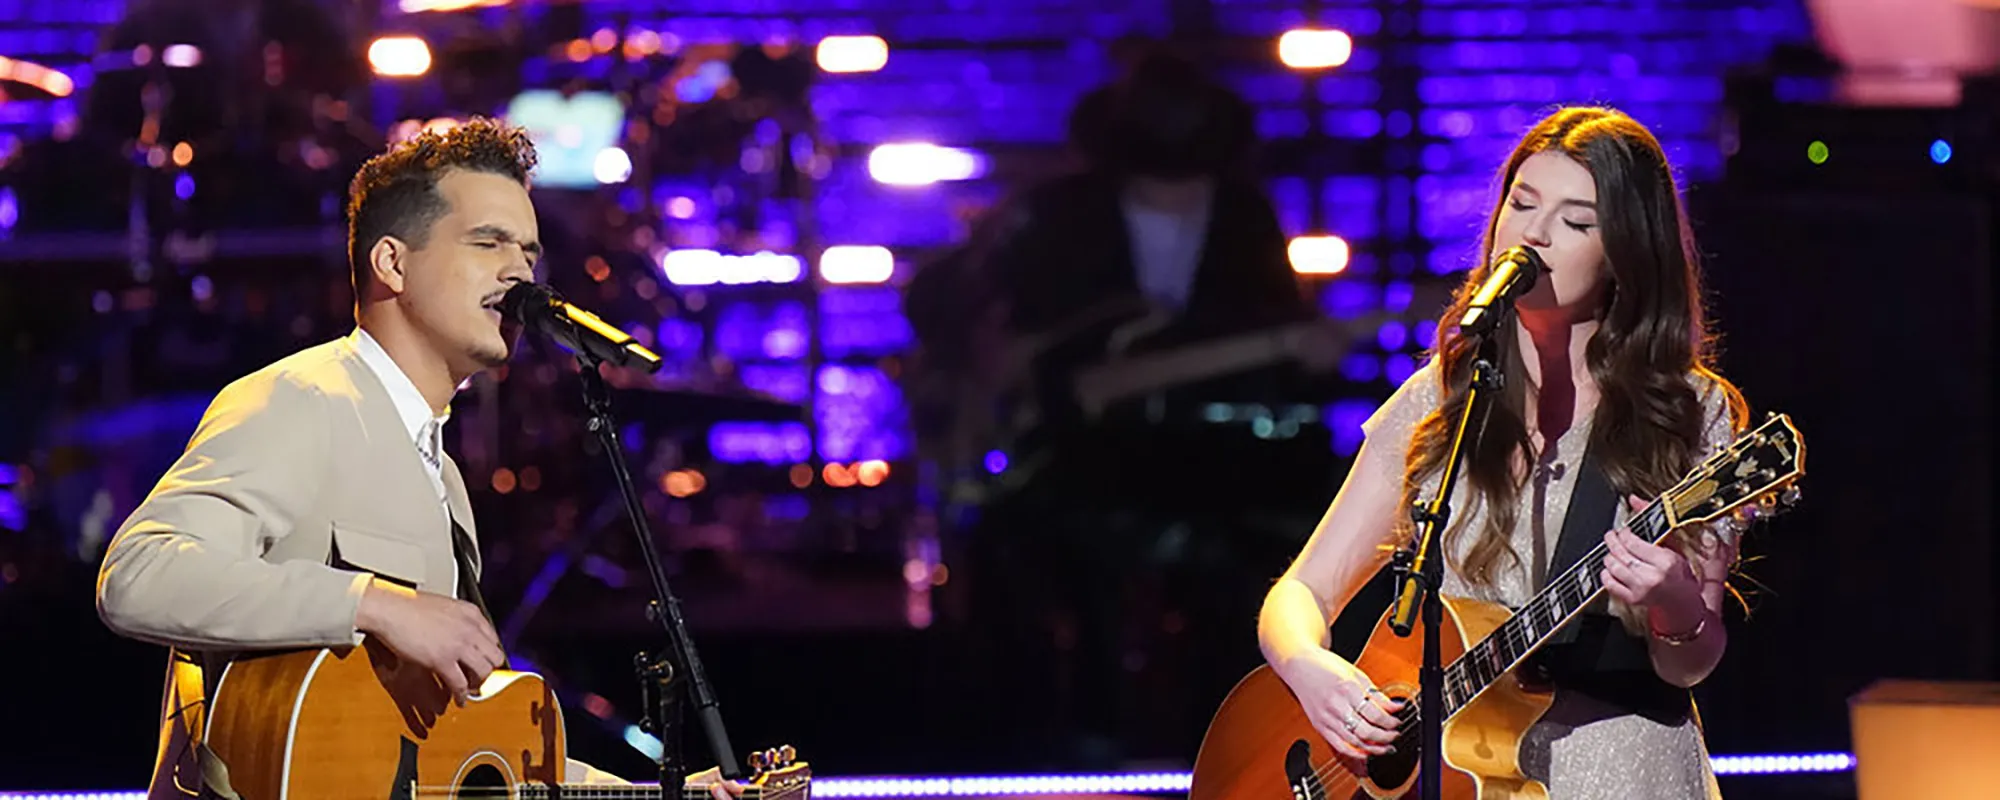 Grace West and Carlos Cover Randy Travis’ “I Told You So” on ‘The Voice’